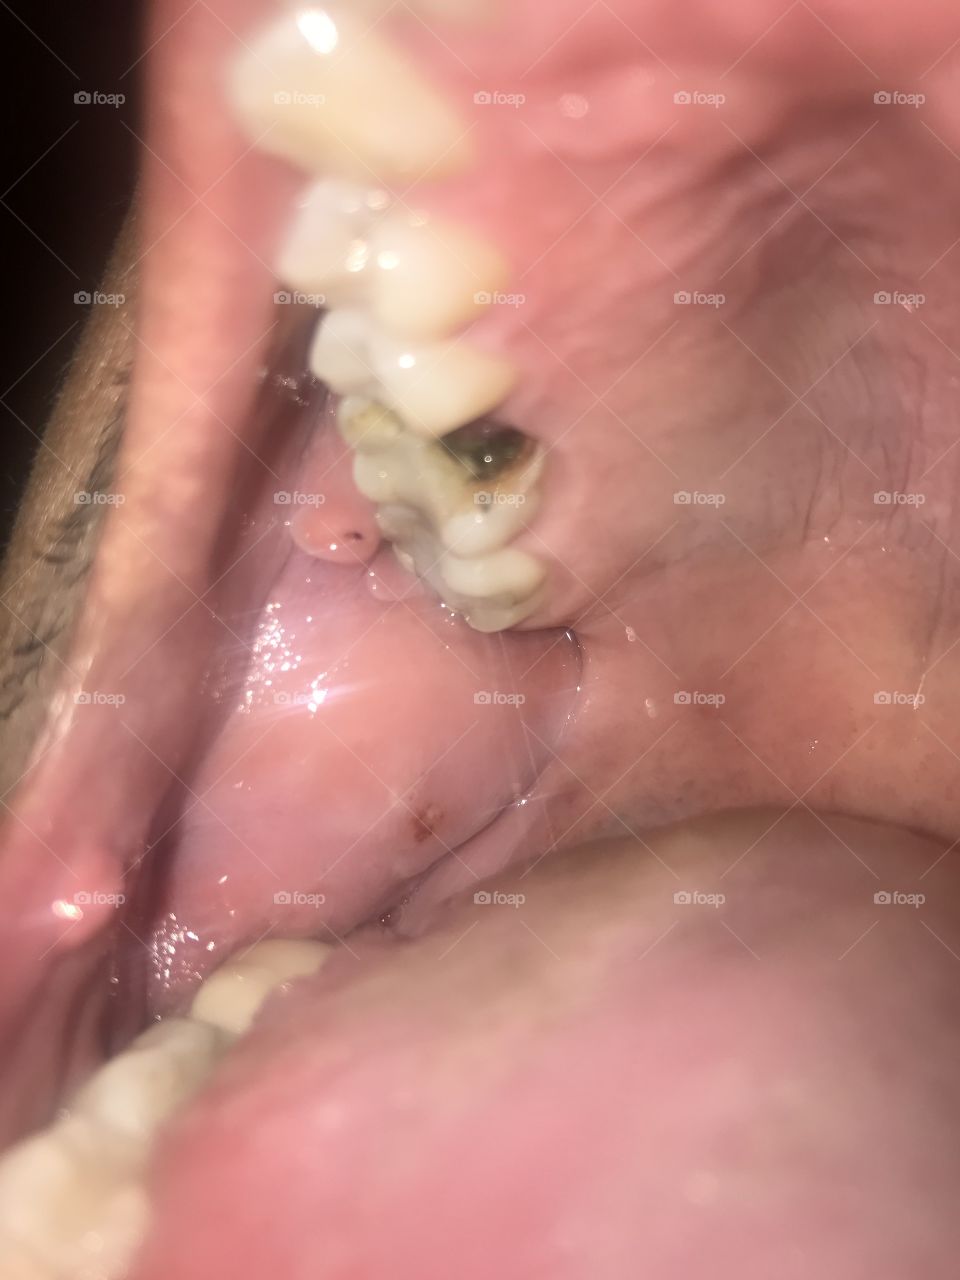 Tooth Bad tooth